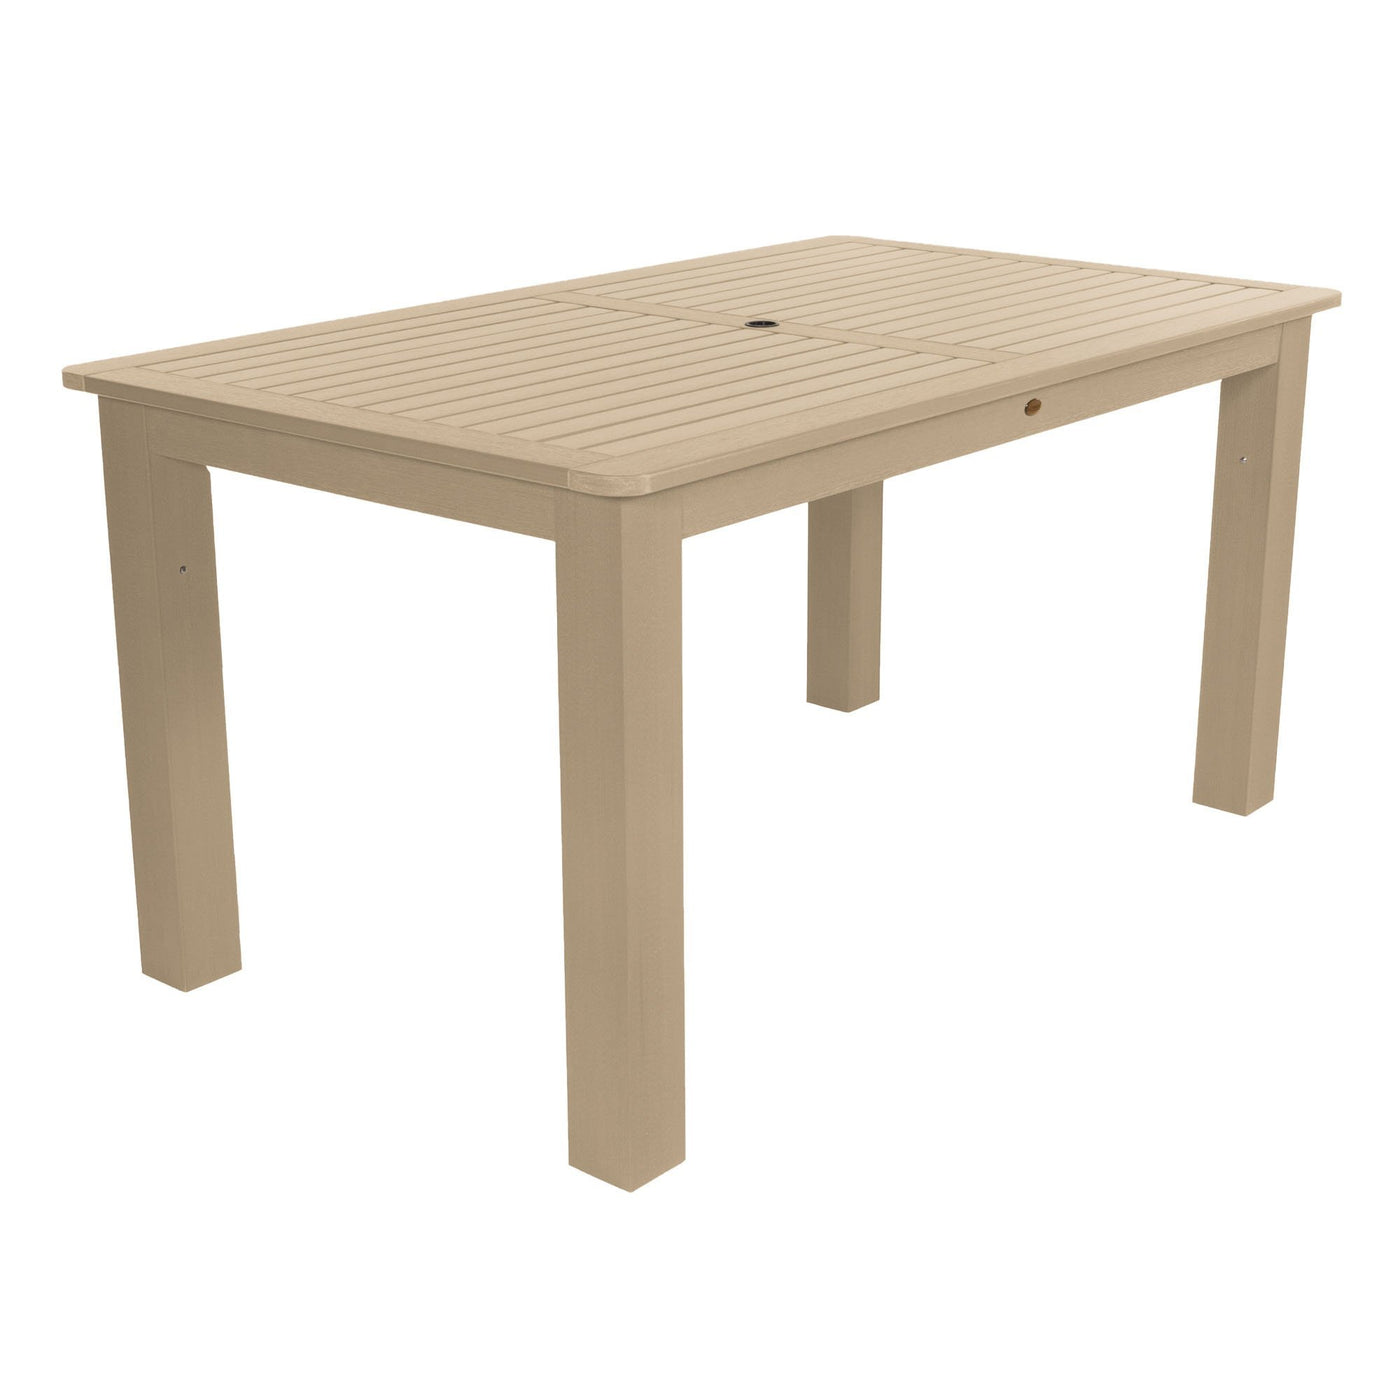 Rectangular 42in x 72in Outdoor Dining Table - Counter Height Dining Highwood USA Tuscan Taupe 